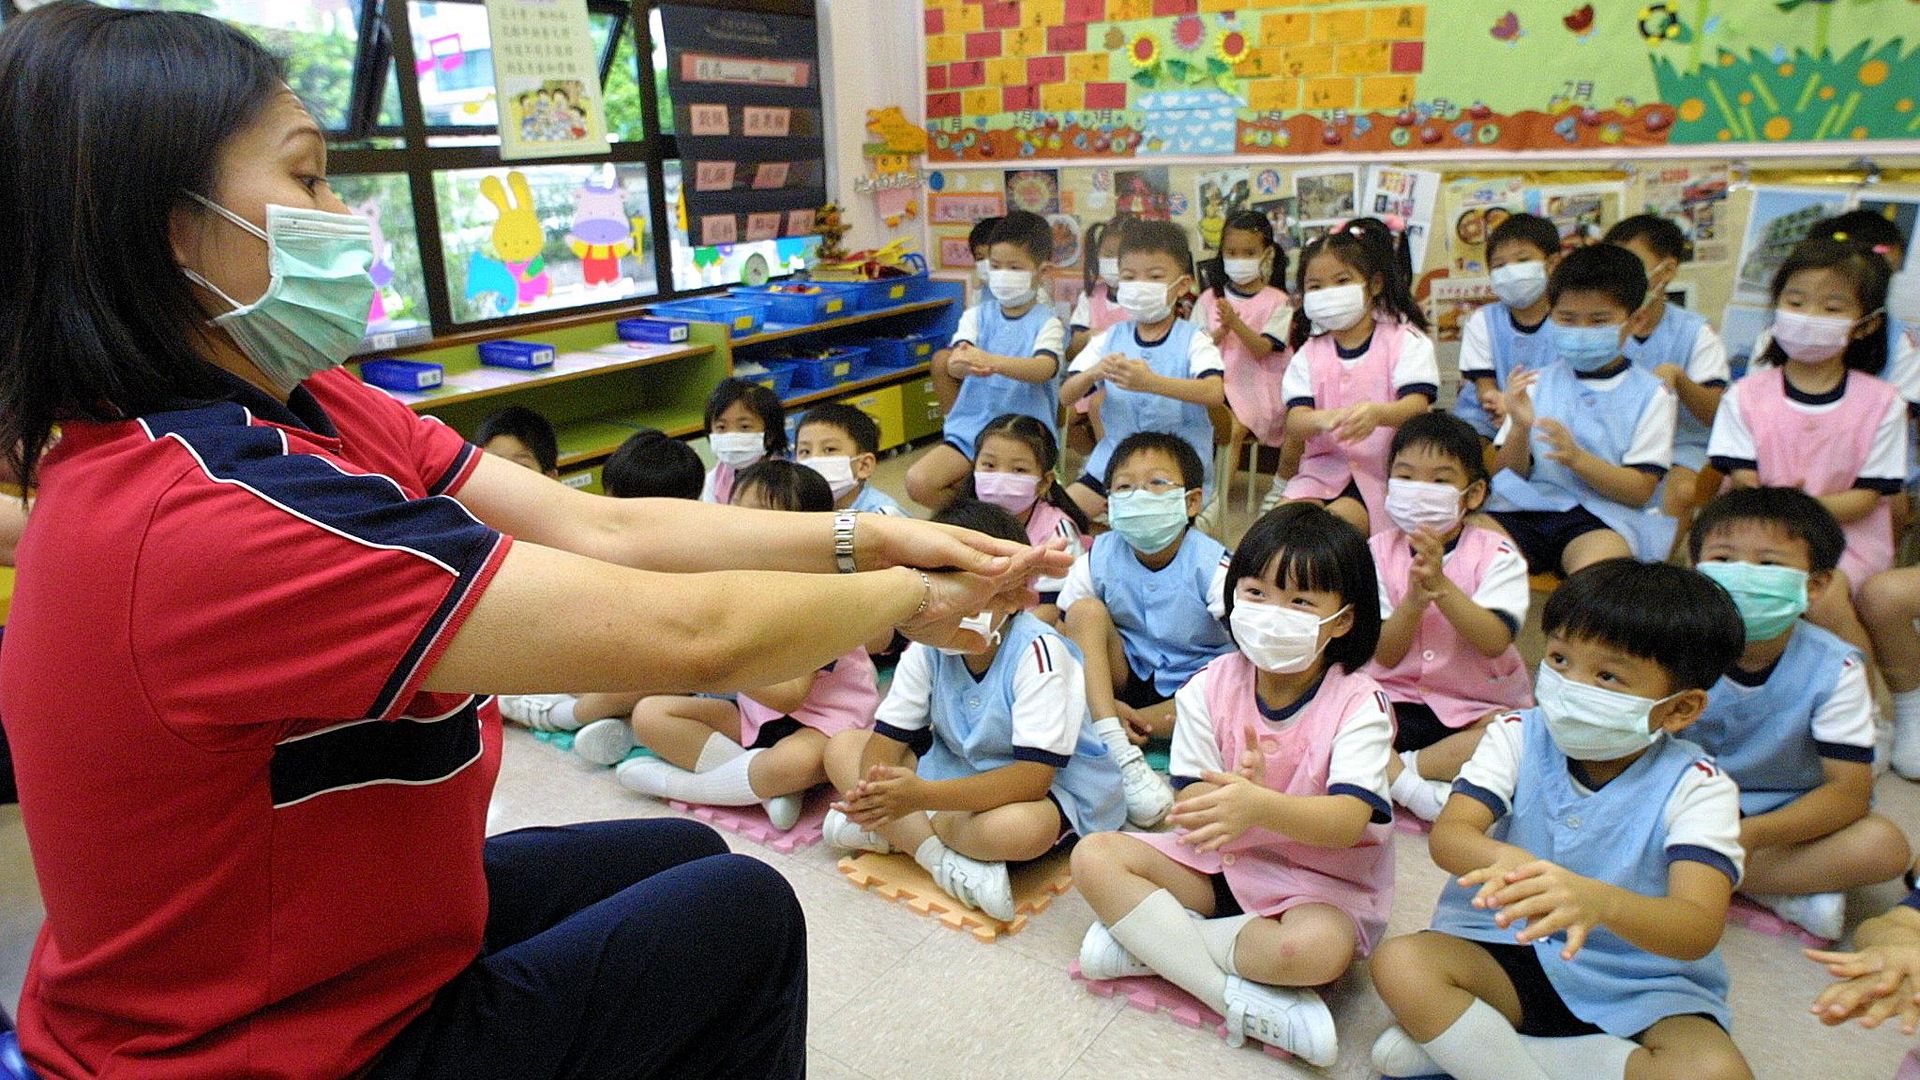 Image of a teacher in Hong Kong addressing a class of masked children on hand hygiene for COVID-19.